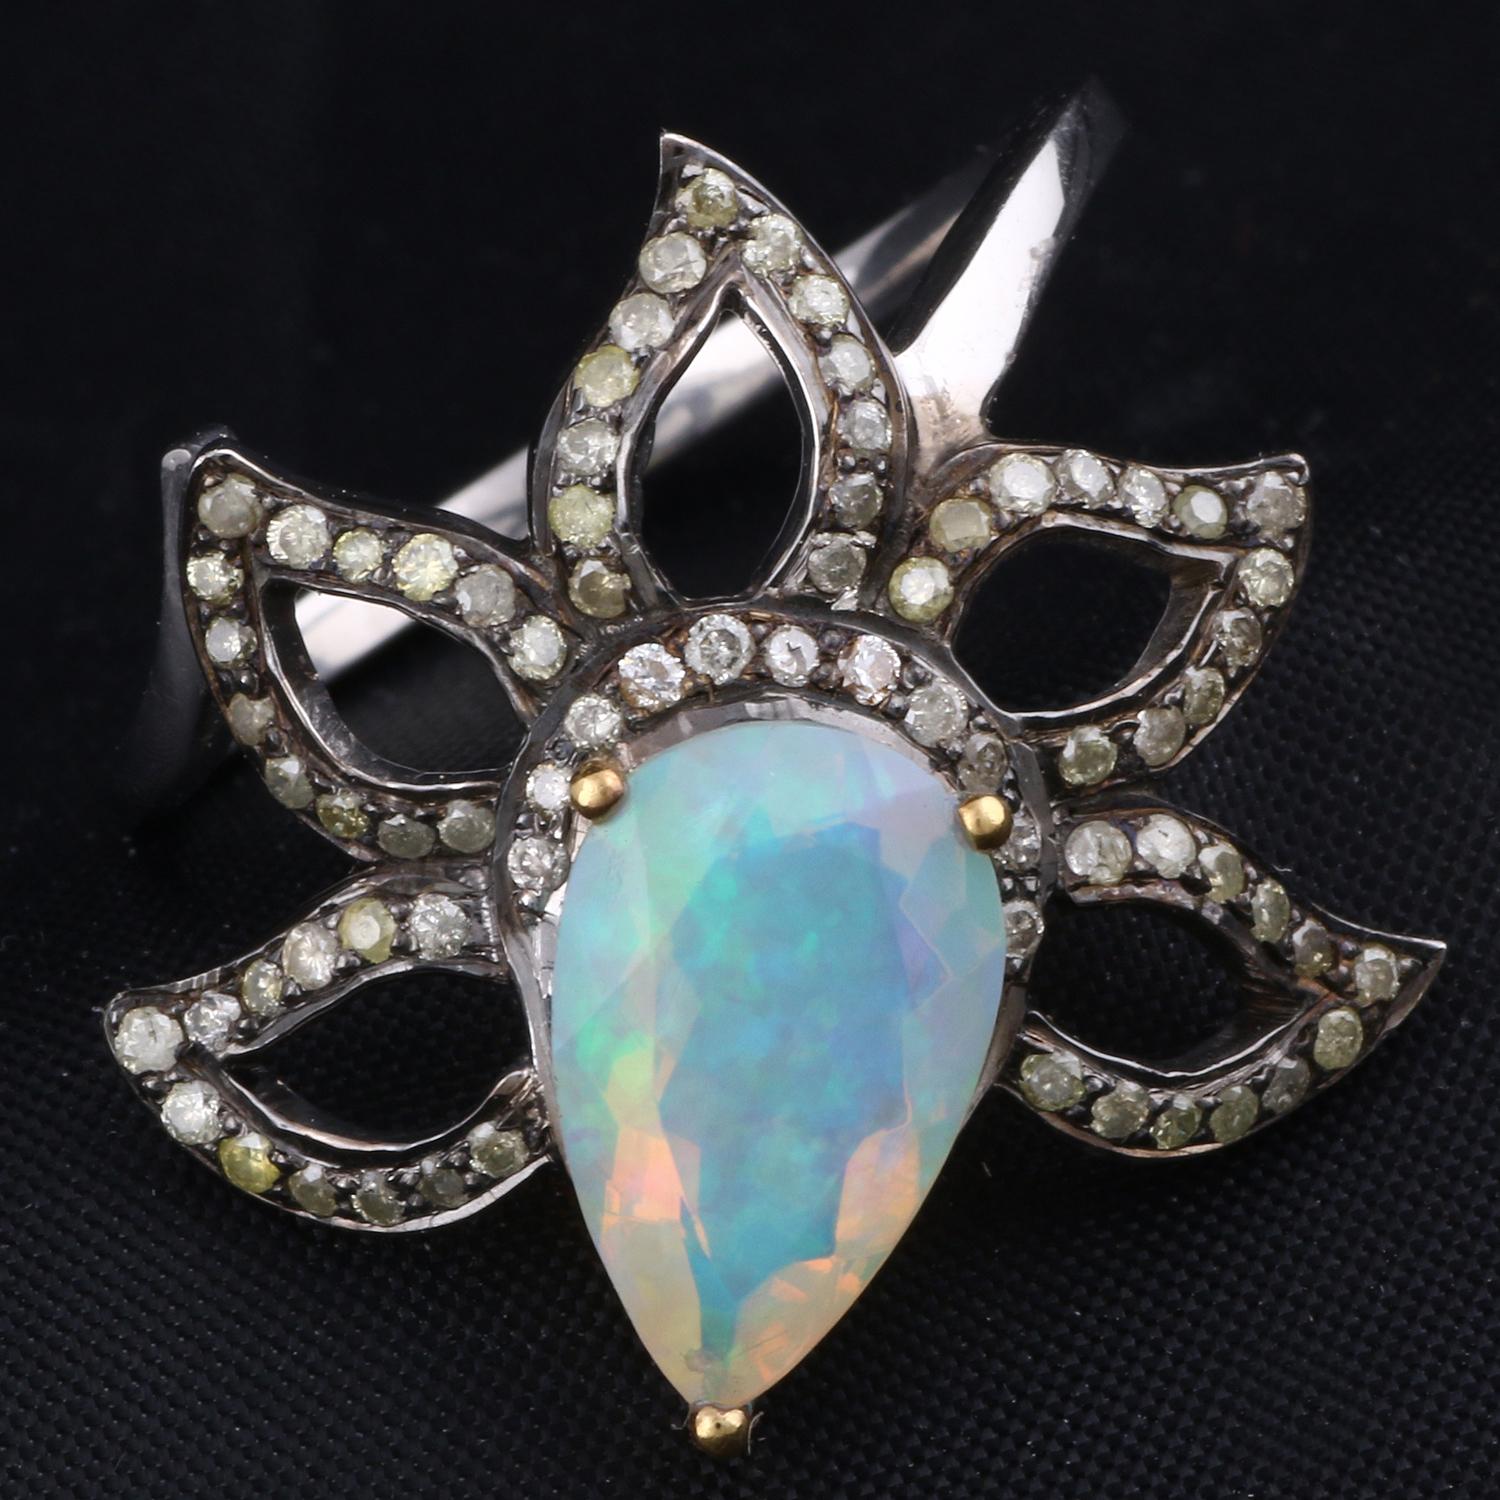 Item details:-

✦ SKU:- ESRG00150

✦ Material :- Silver
✦ Gemstone Specification:-
✧ Diamond
✧ Ethiopian Opal

✦ Approx. Diamond Weight : 0.6
✦ Approx. Silver Weight : 3.45
✦ Approx. Gross Weight : 3.9

Ring Size (US): 8

You will Get the same